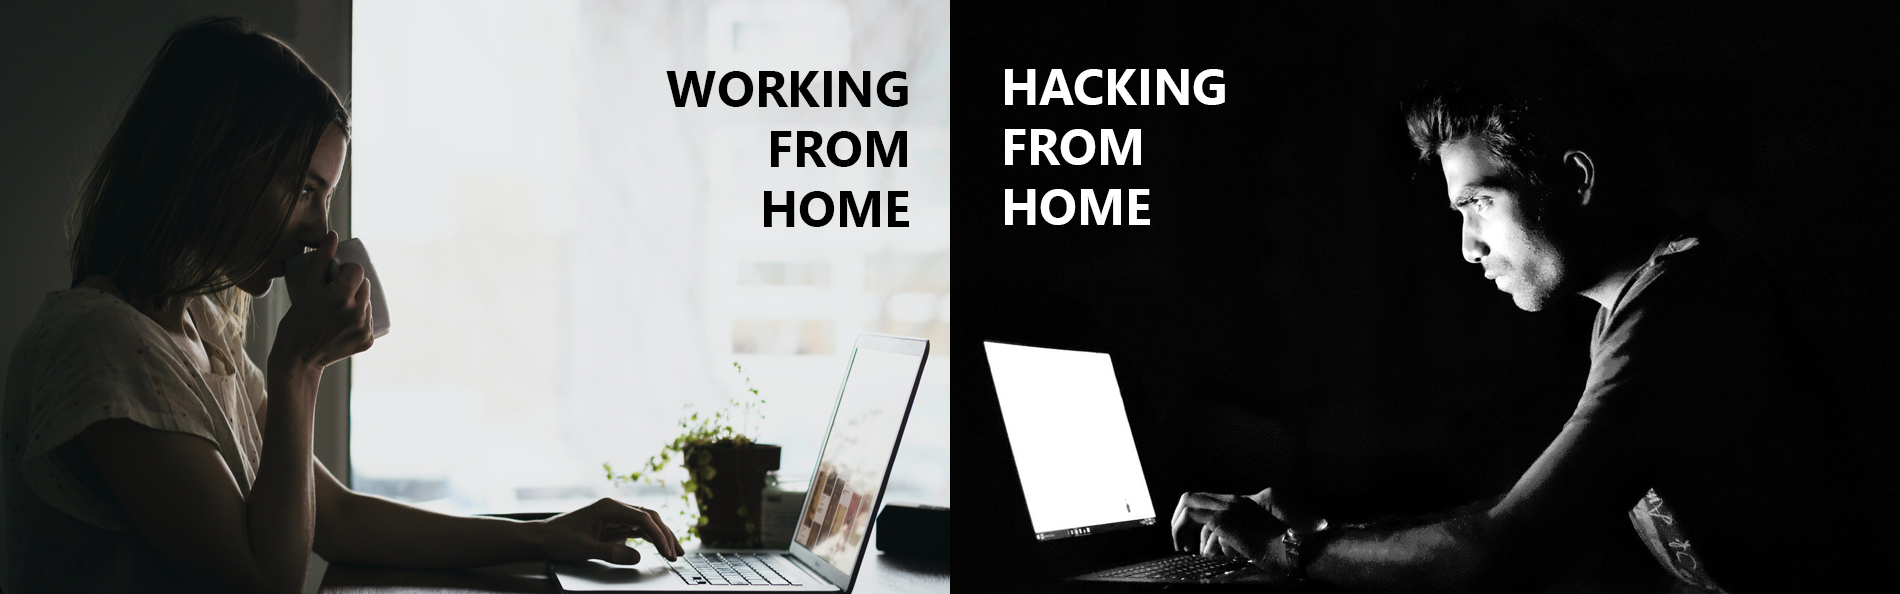 Working from home/ Hacking from home